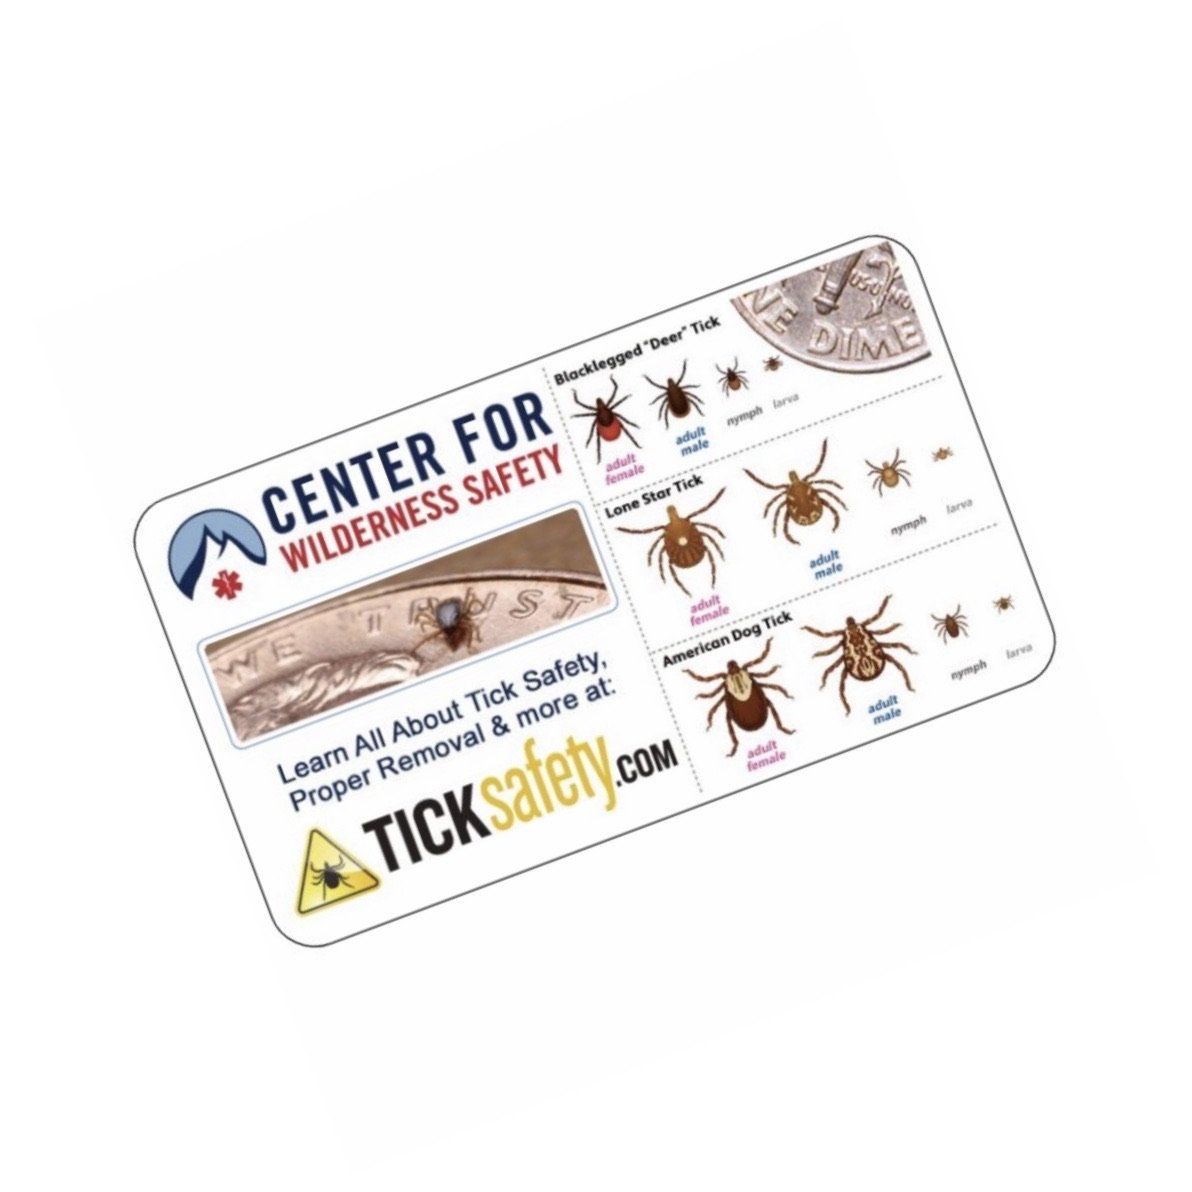 Tick Identification Cards Reference Card TickSafety.com 